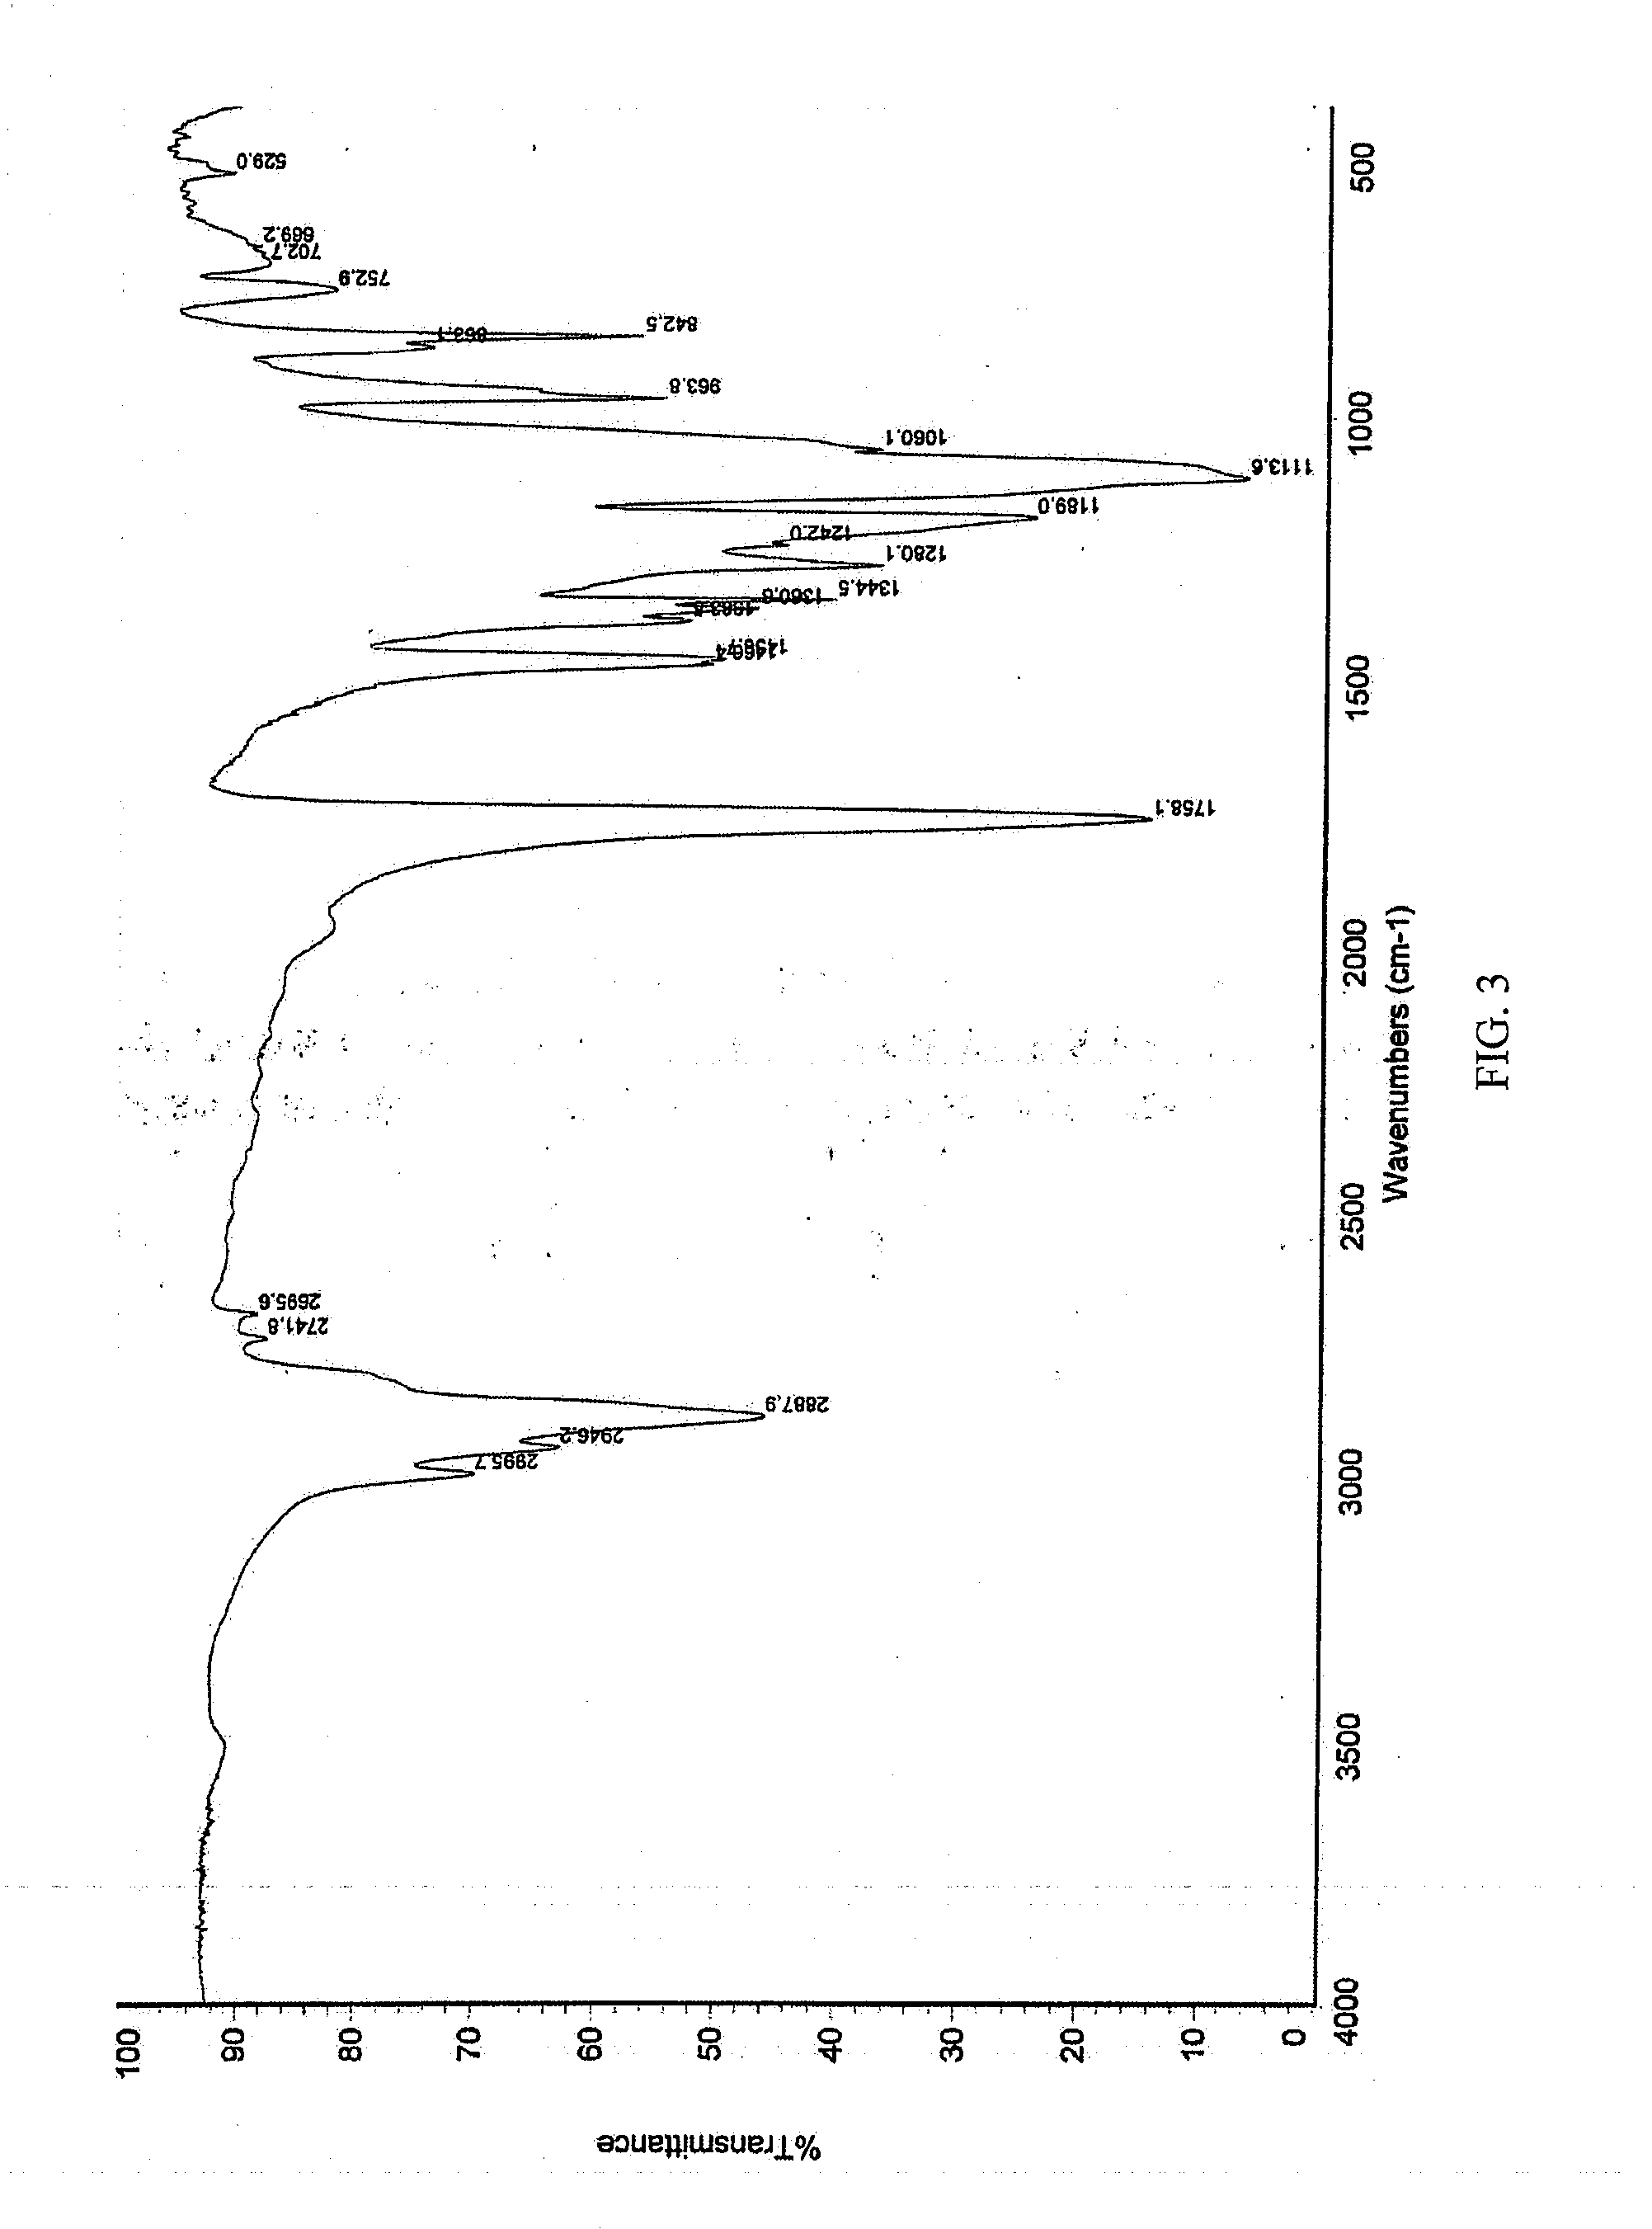 Pharmaceutical Formulations Comprising Voriconazole and Processes for Preparation Thereof